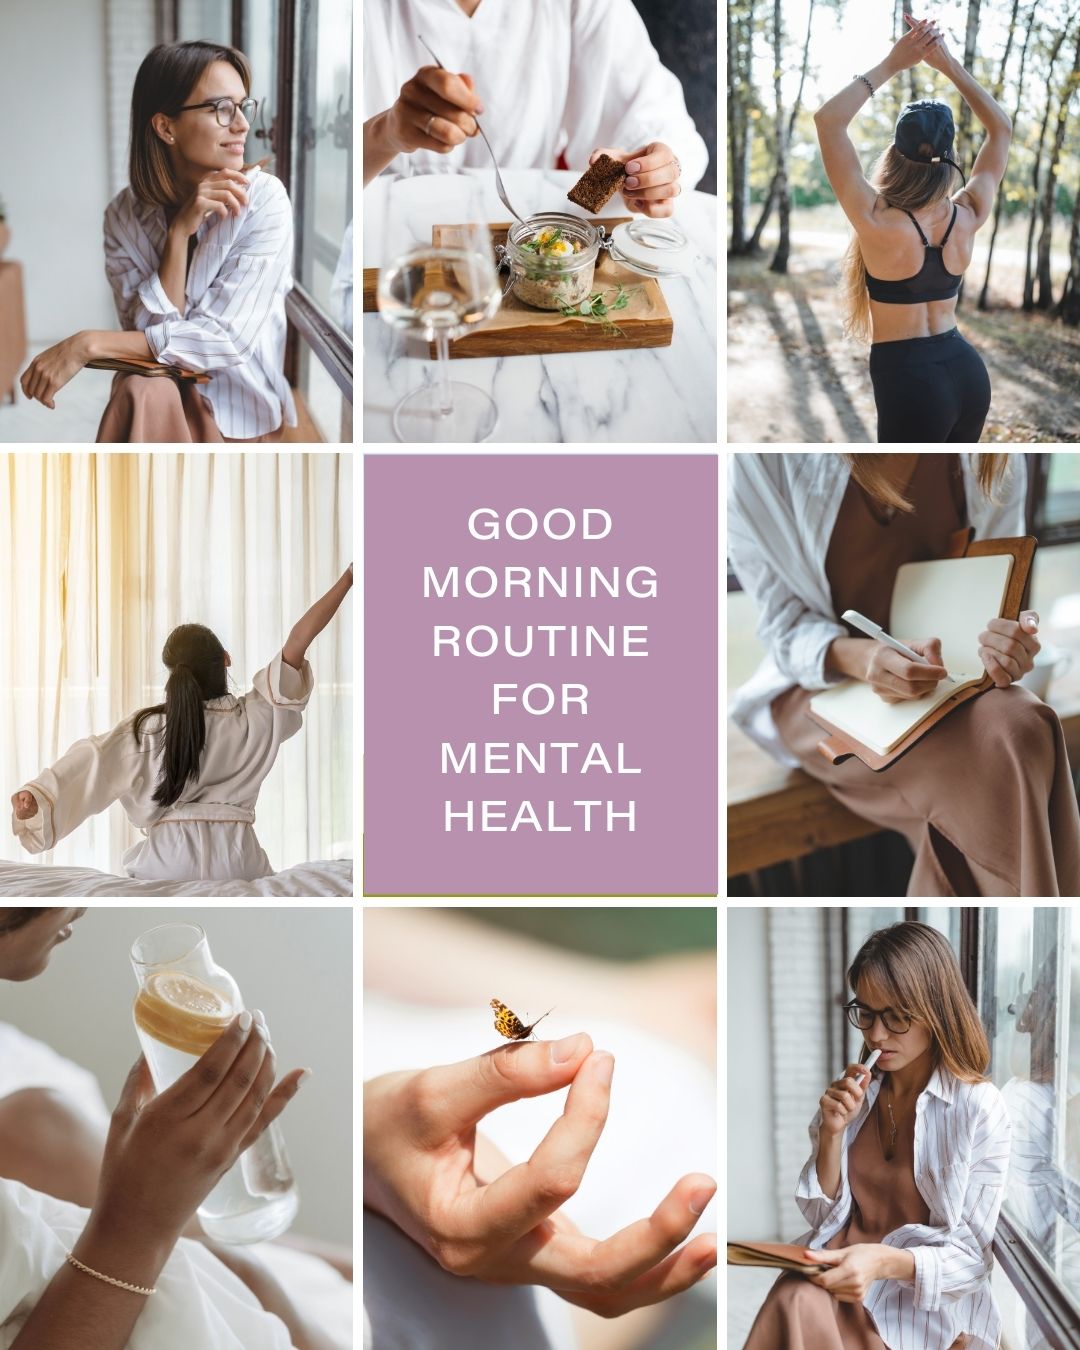 Depictions of a good morning routine for mental health. A woman journaling. A woman eating breakfast. 